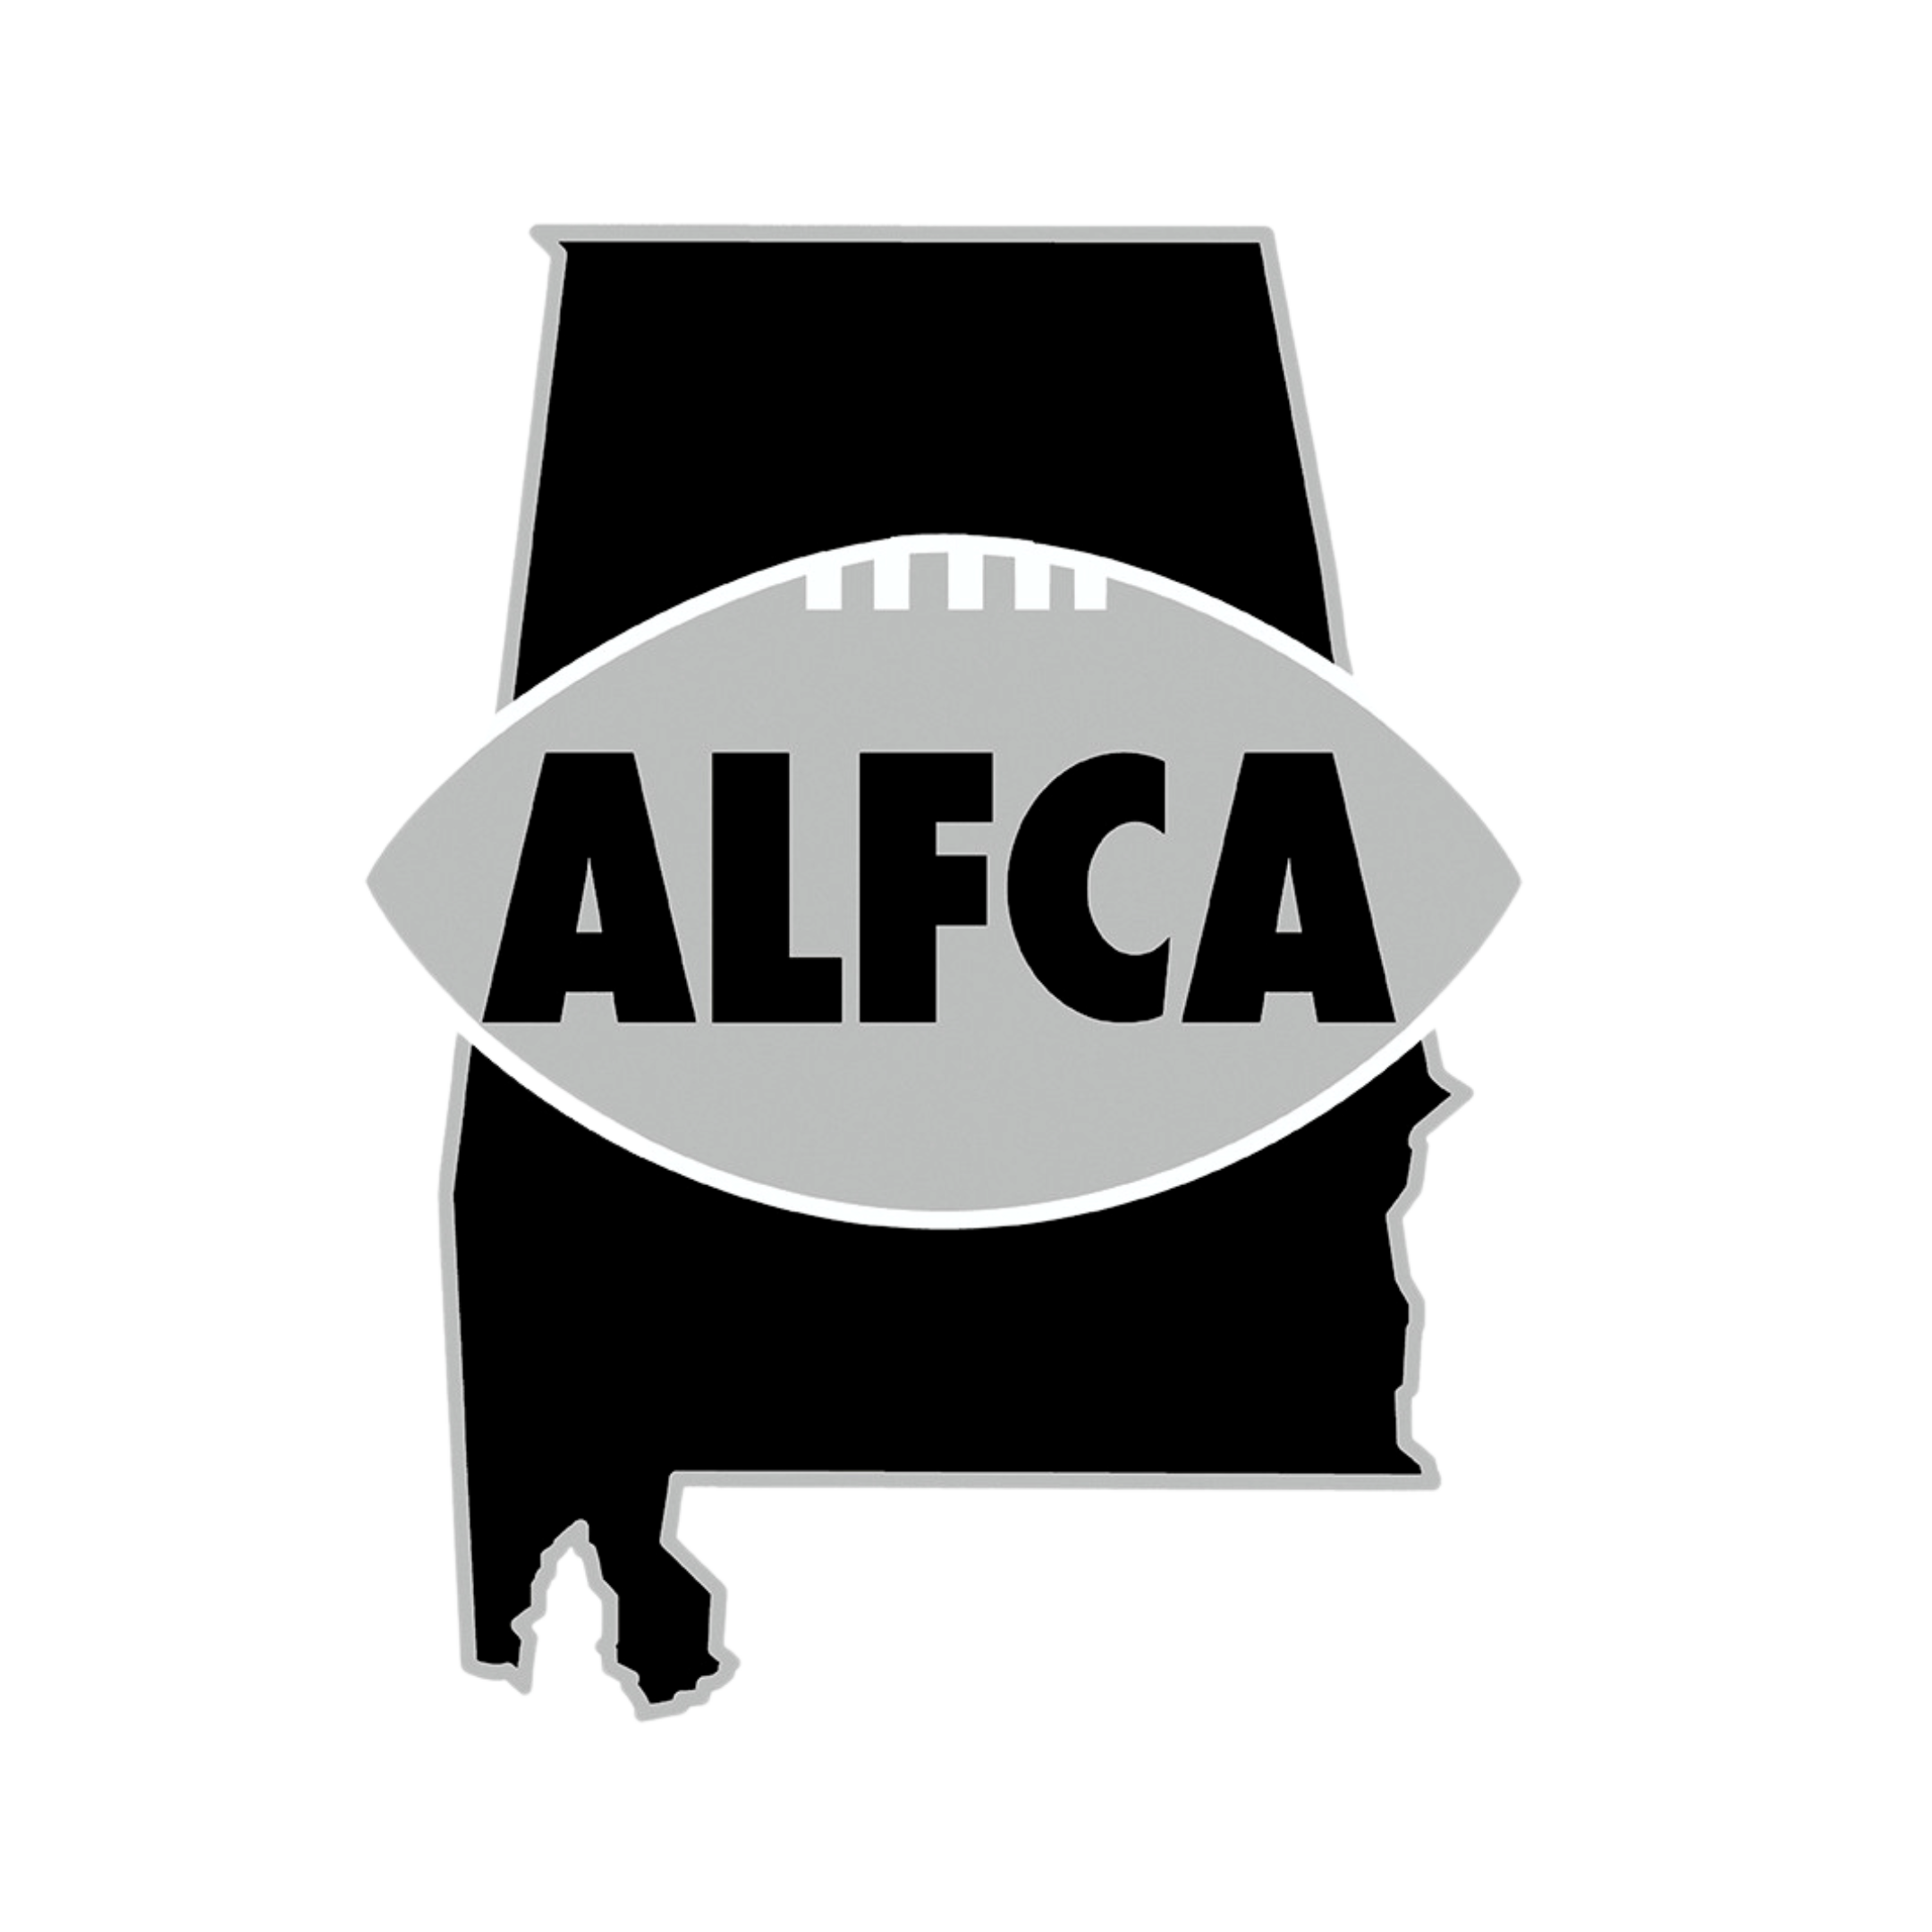 Alabama Football Coaches Association Partners With Eccker Sports to Provide NIL Educational Services to High School Coaches Throughout The State